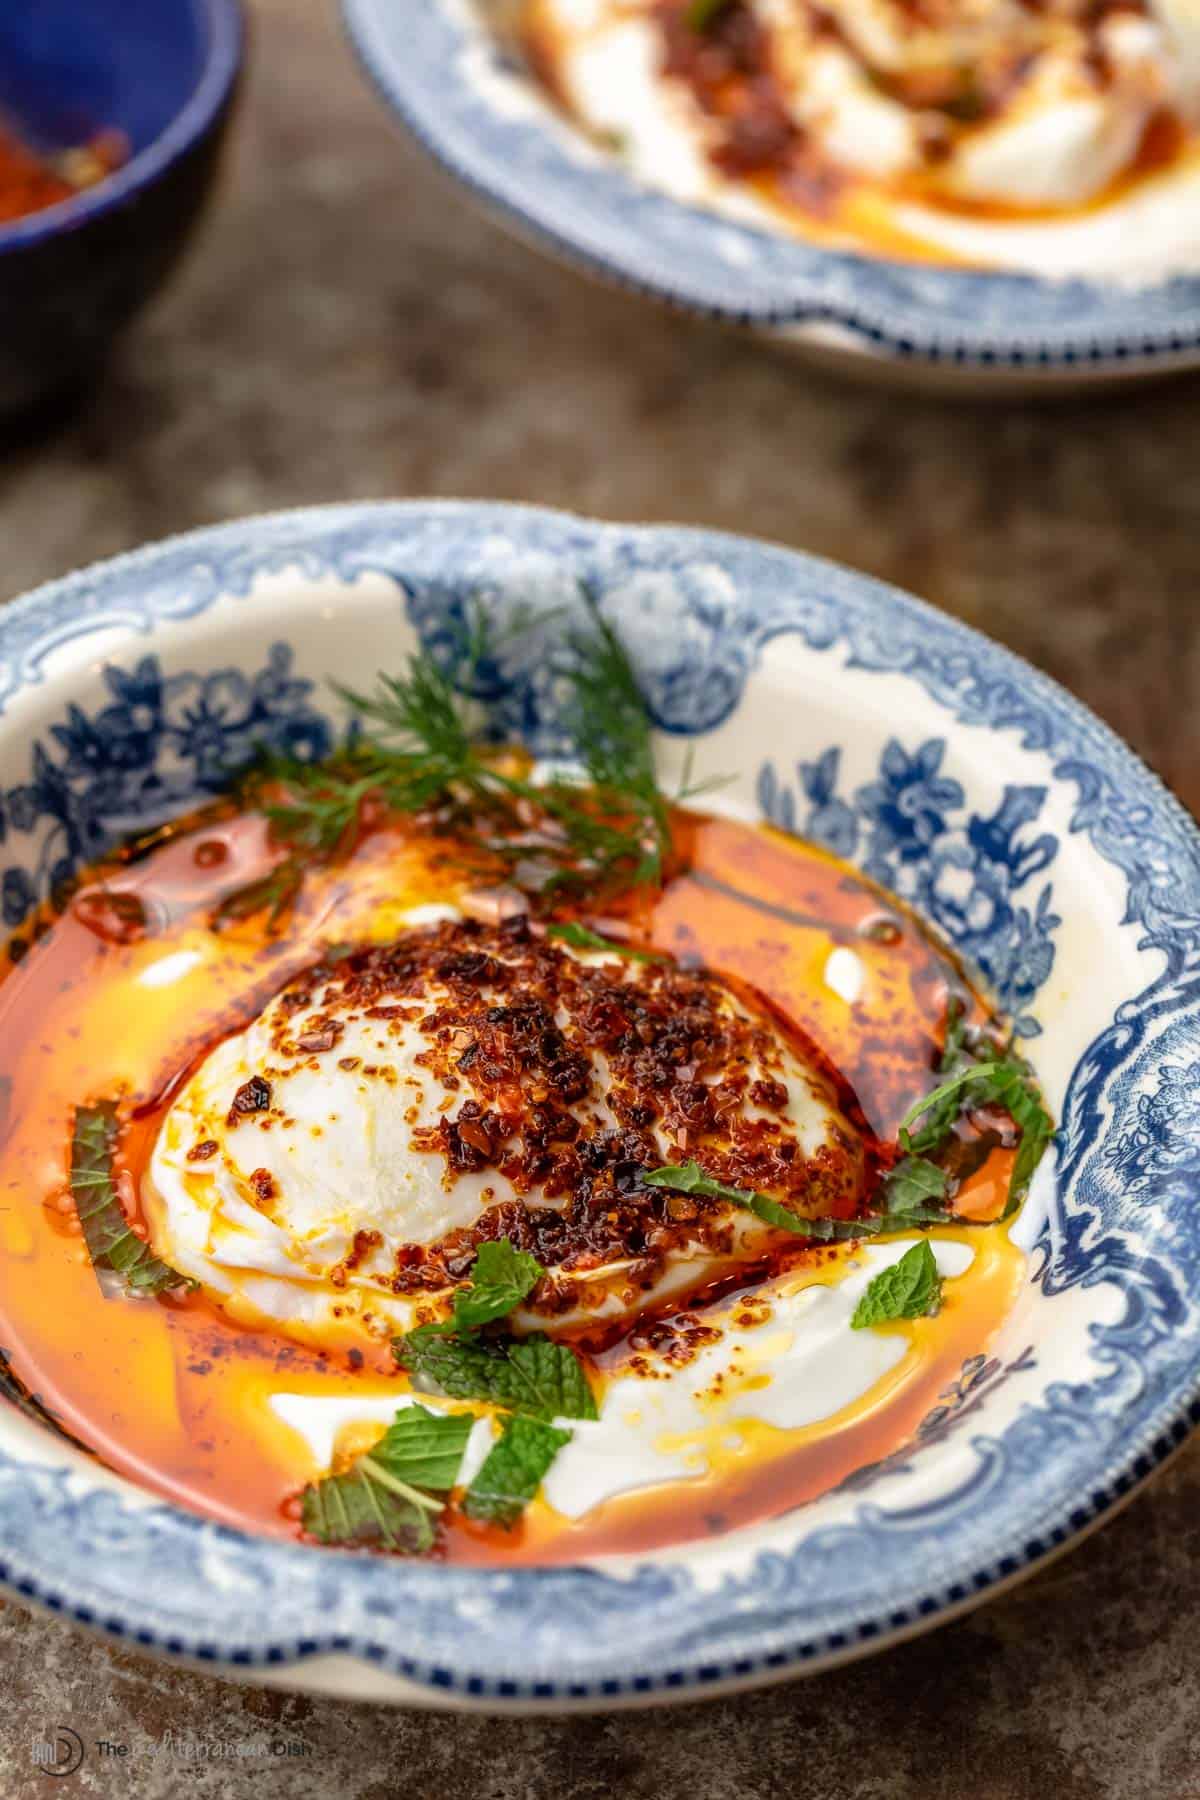 Turkish eggs in a blue and white dish